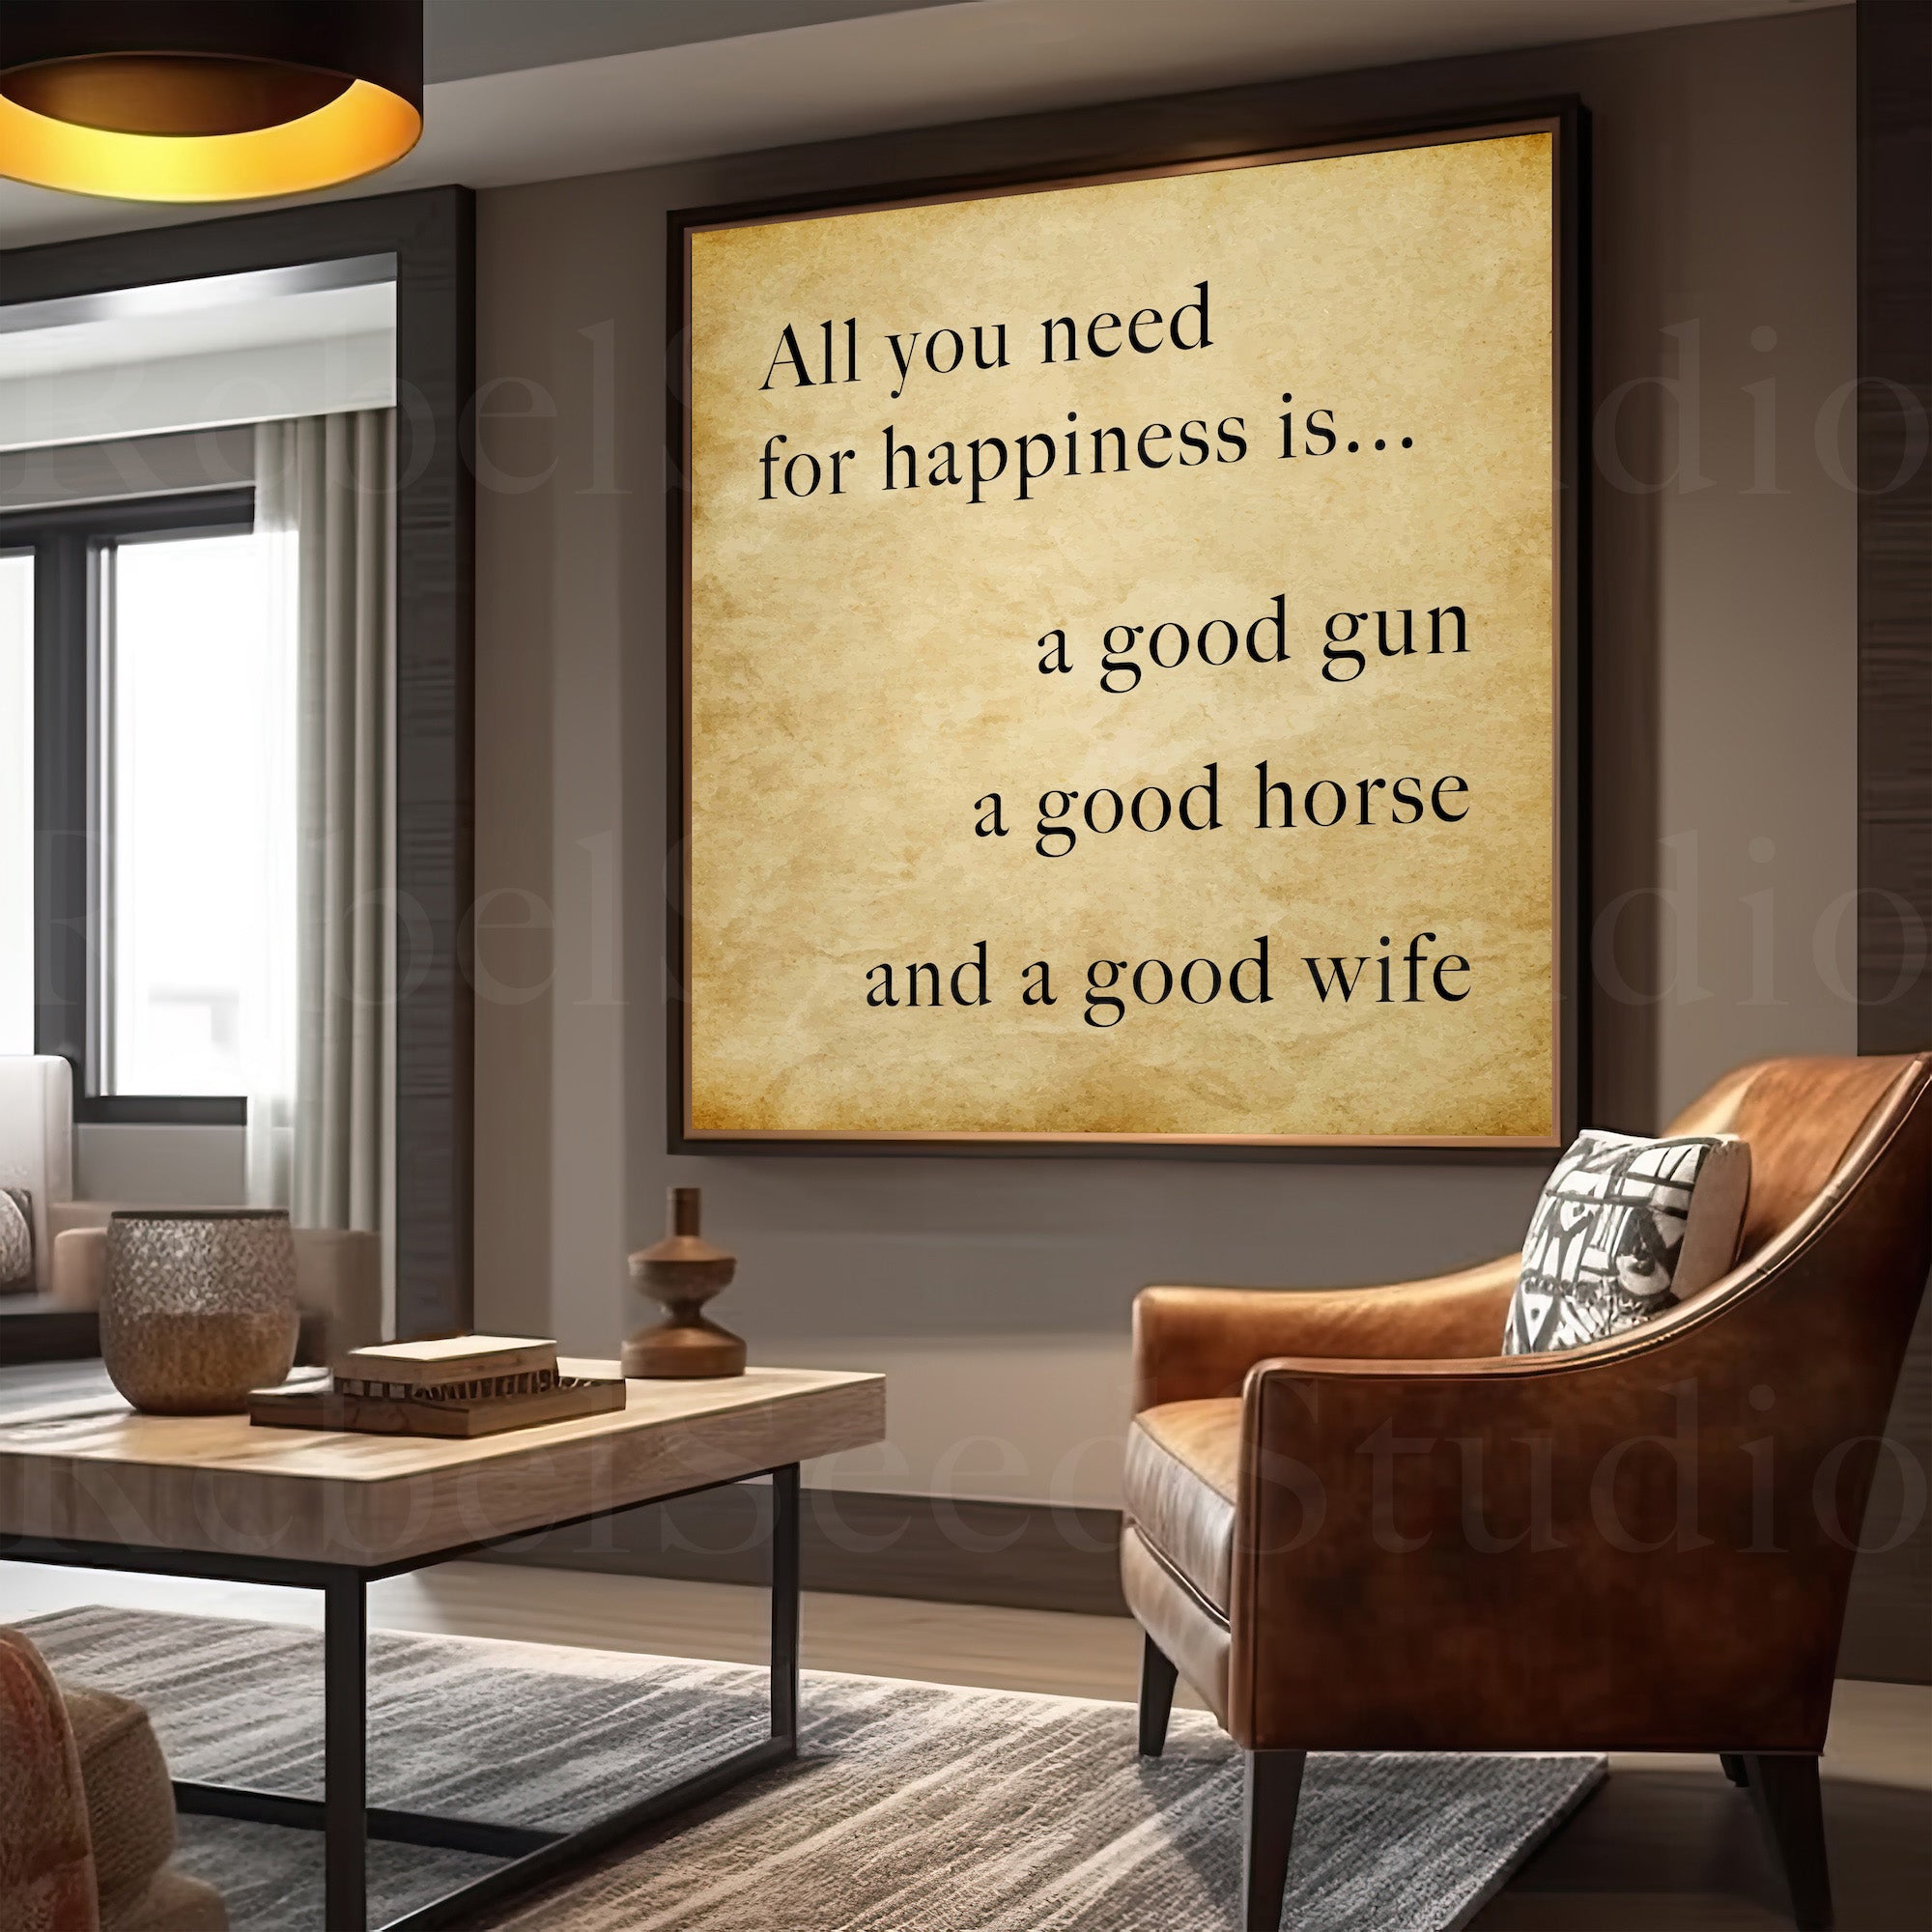 Daniel Boone Quote: All You Need For Happiness Is a Good Gun, a Good Horse & A Good Wife - Wall Art (Archival Print or Poster Print)